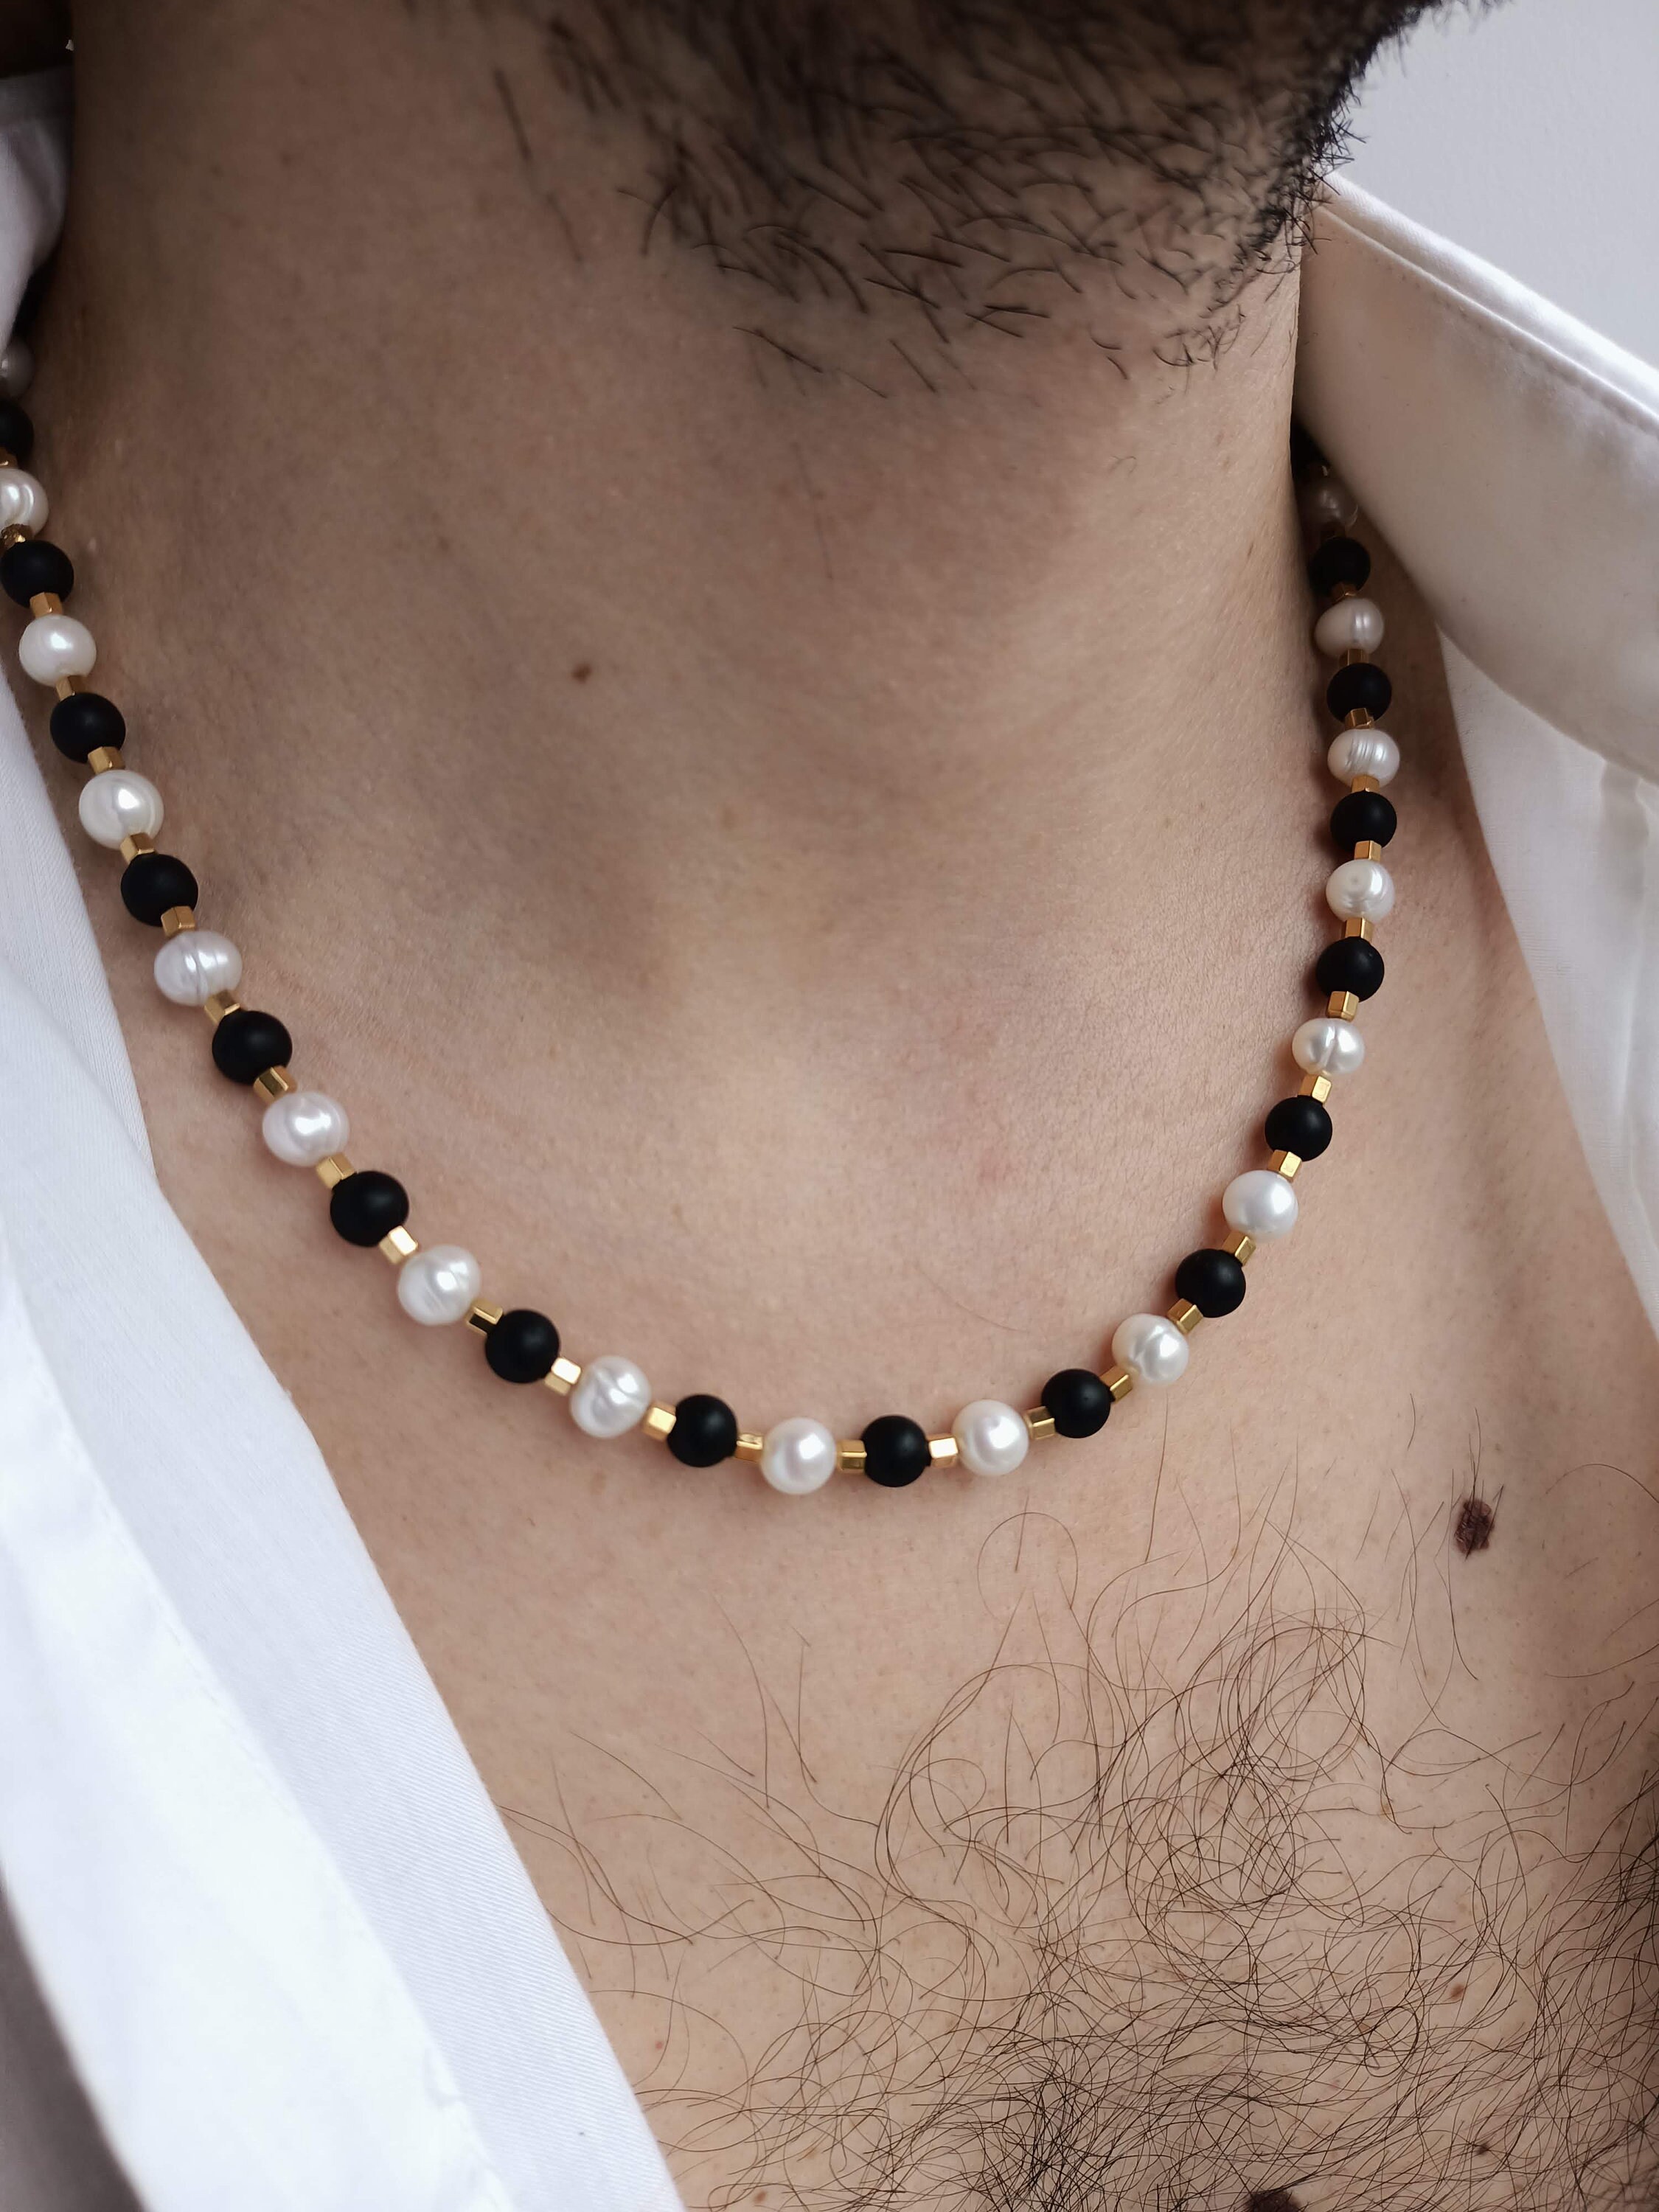 Pearl Necklace for Men,6mm White Mens Pearl Necklace,16